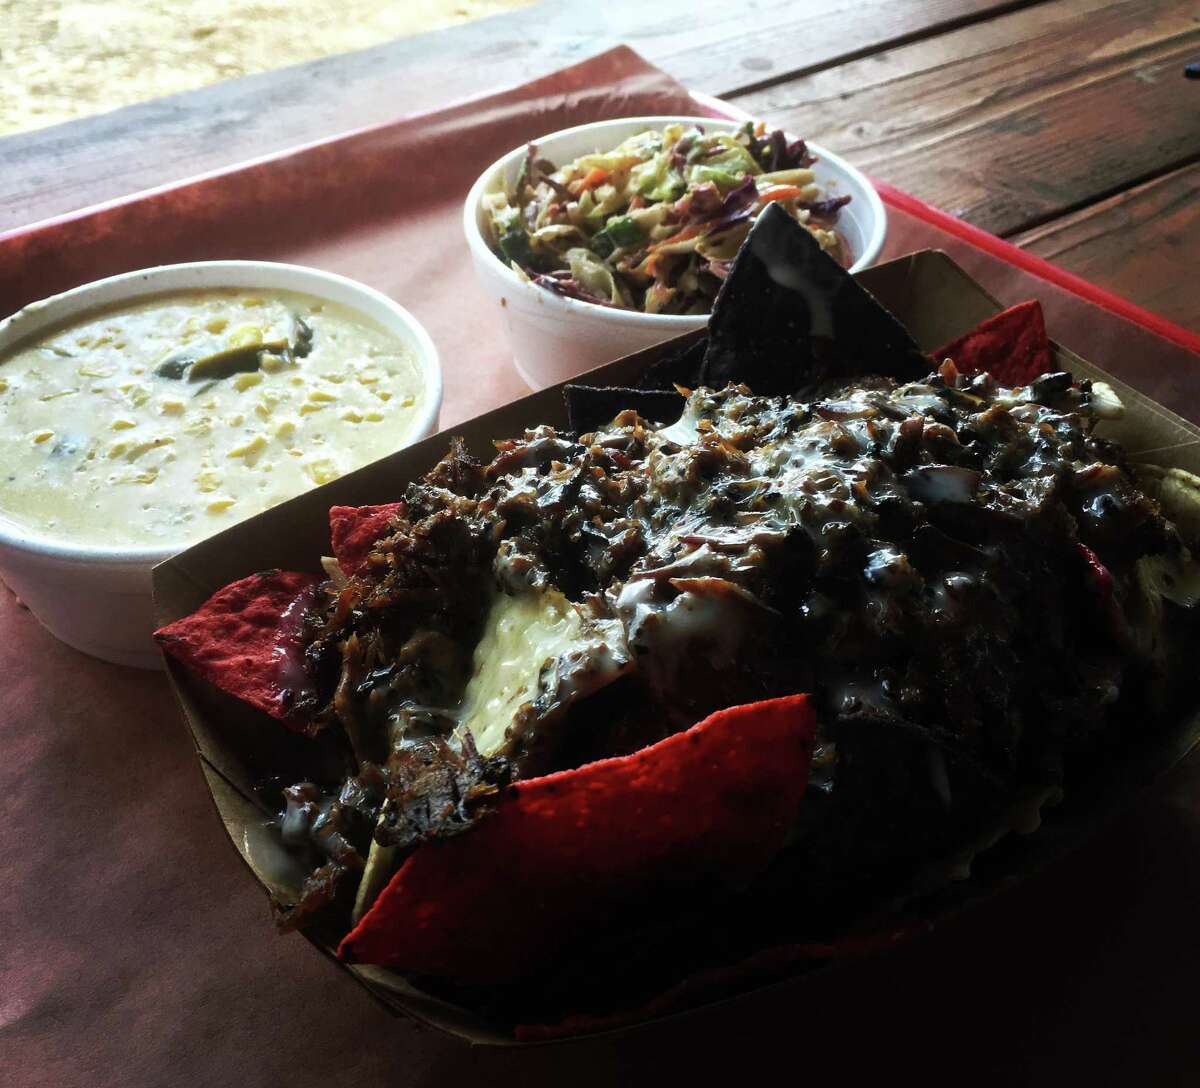 The BBQ nachos ($8) are topped with chopped brisket or pulled pork and layered with a white queso sauce.